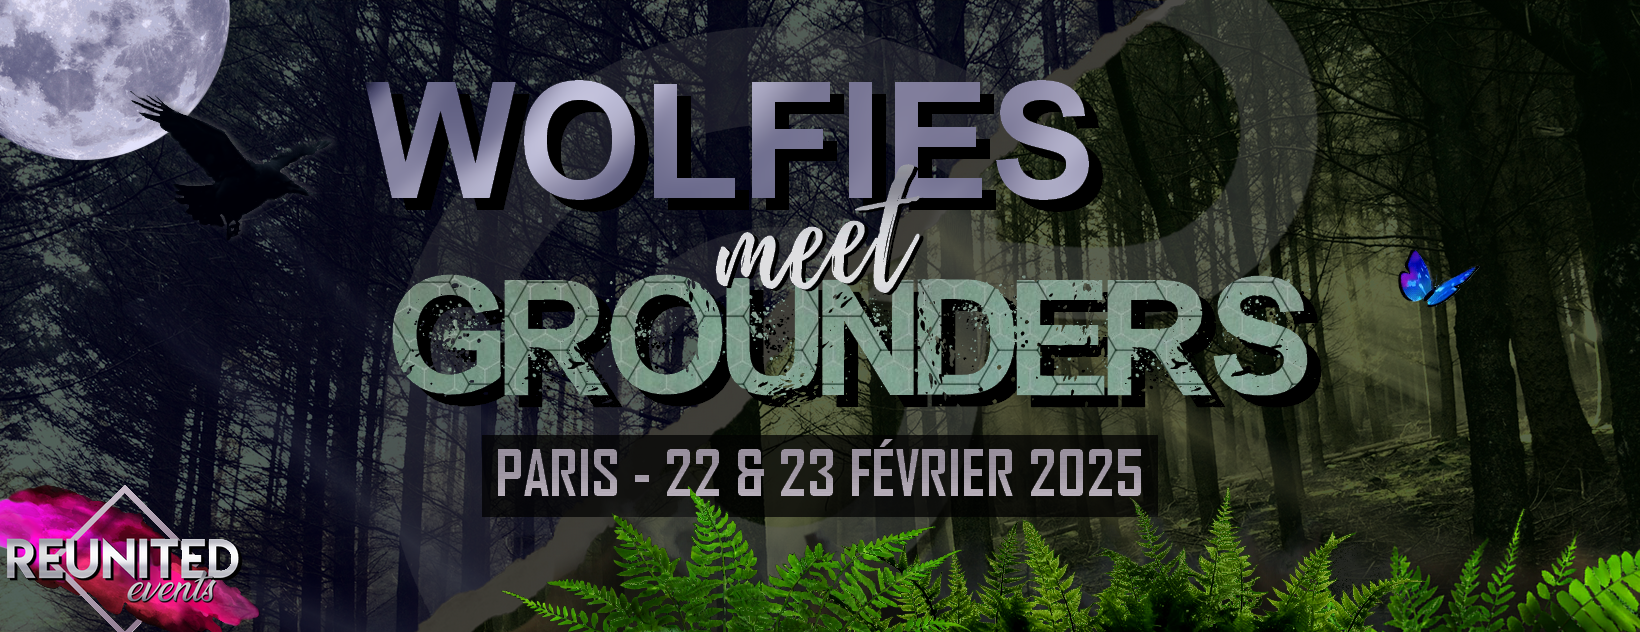 Ticket shop Wolfies meet Grounders - Teen wolf x The 100 convention Paris 2025